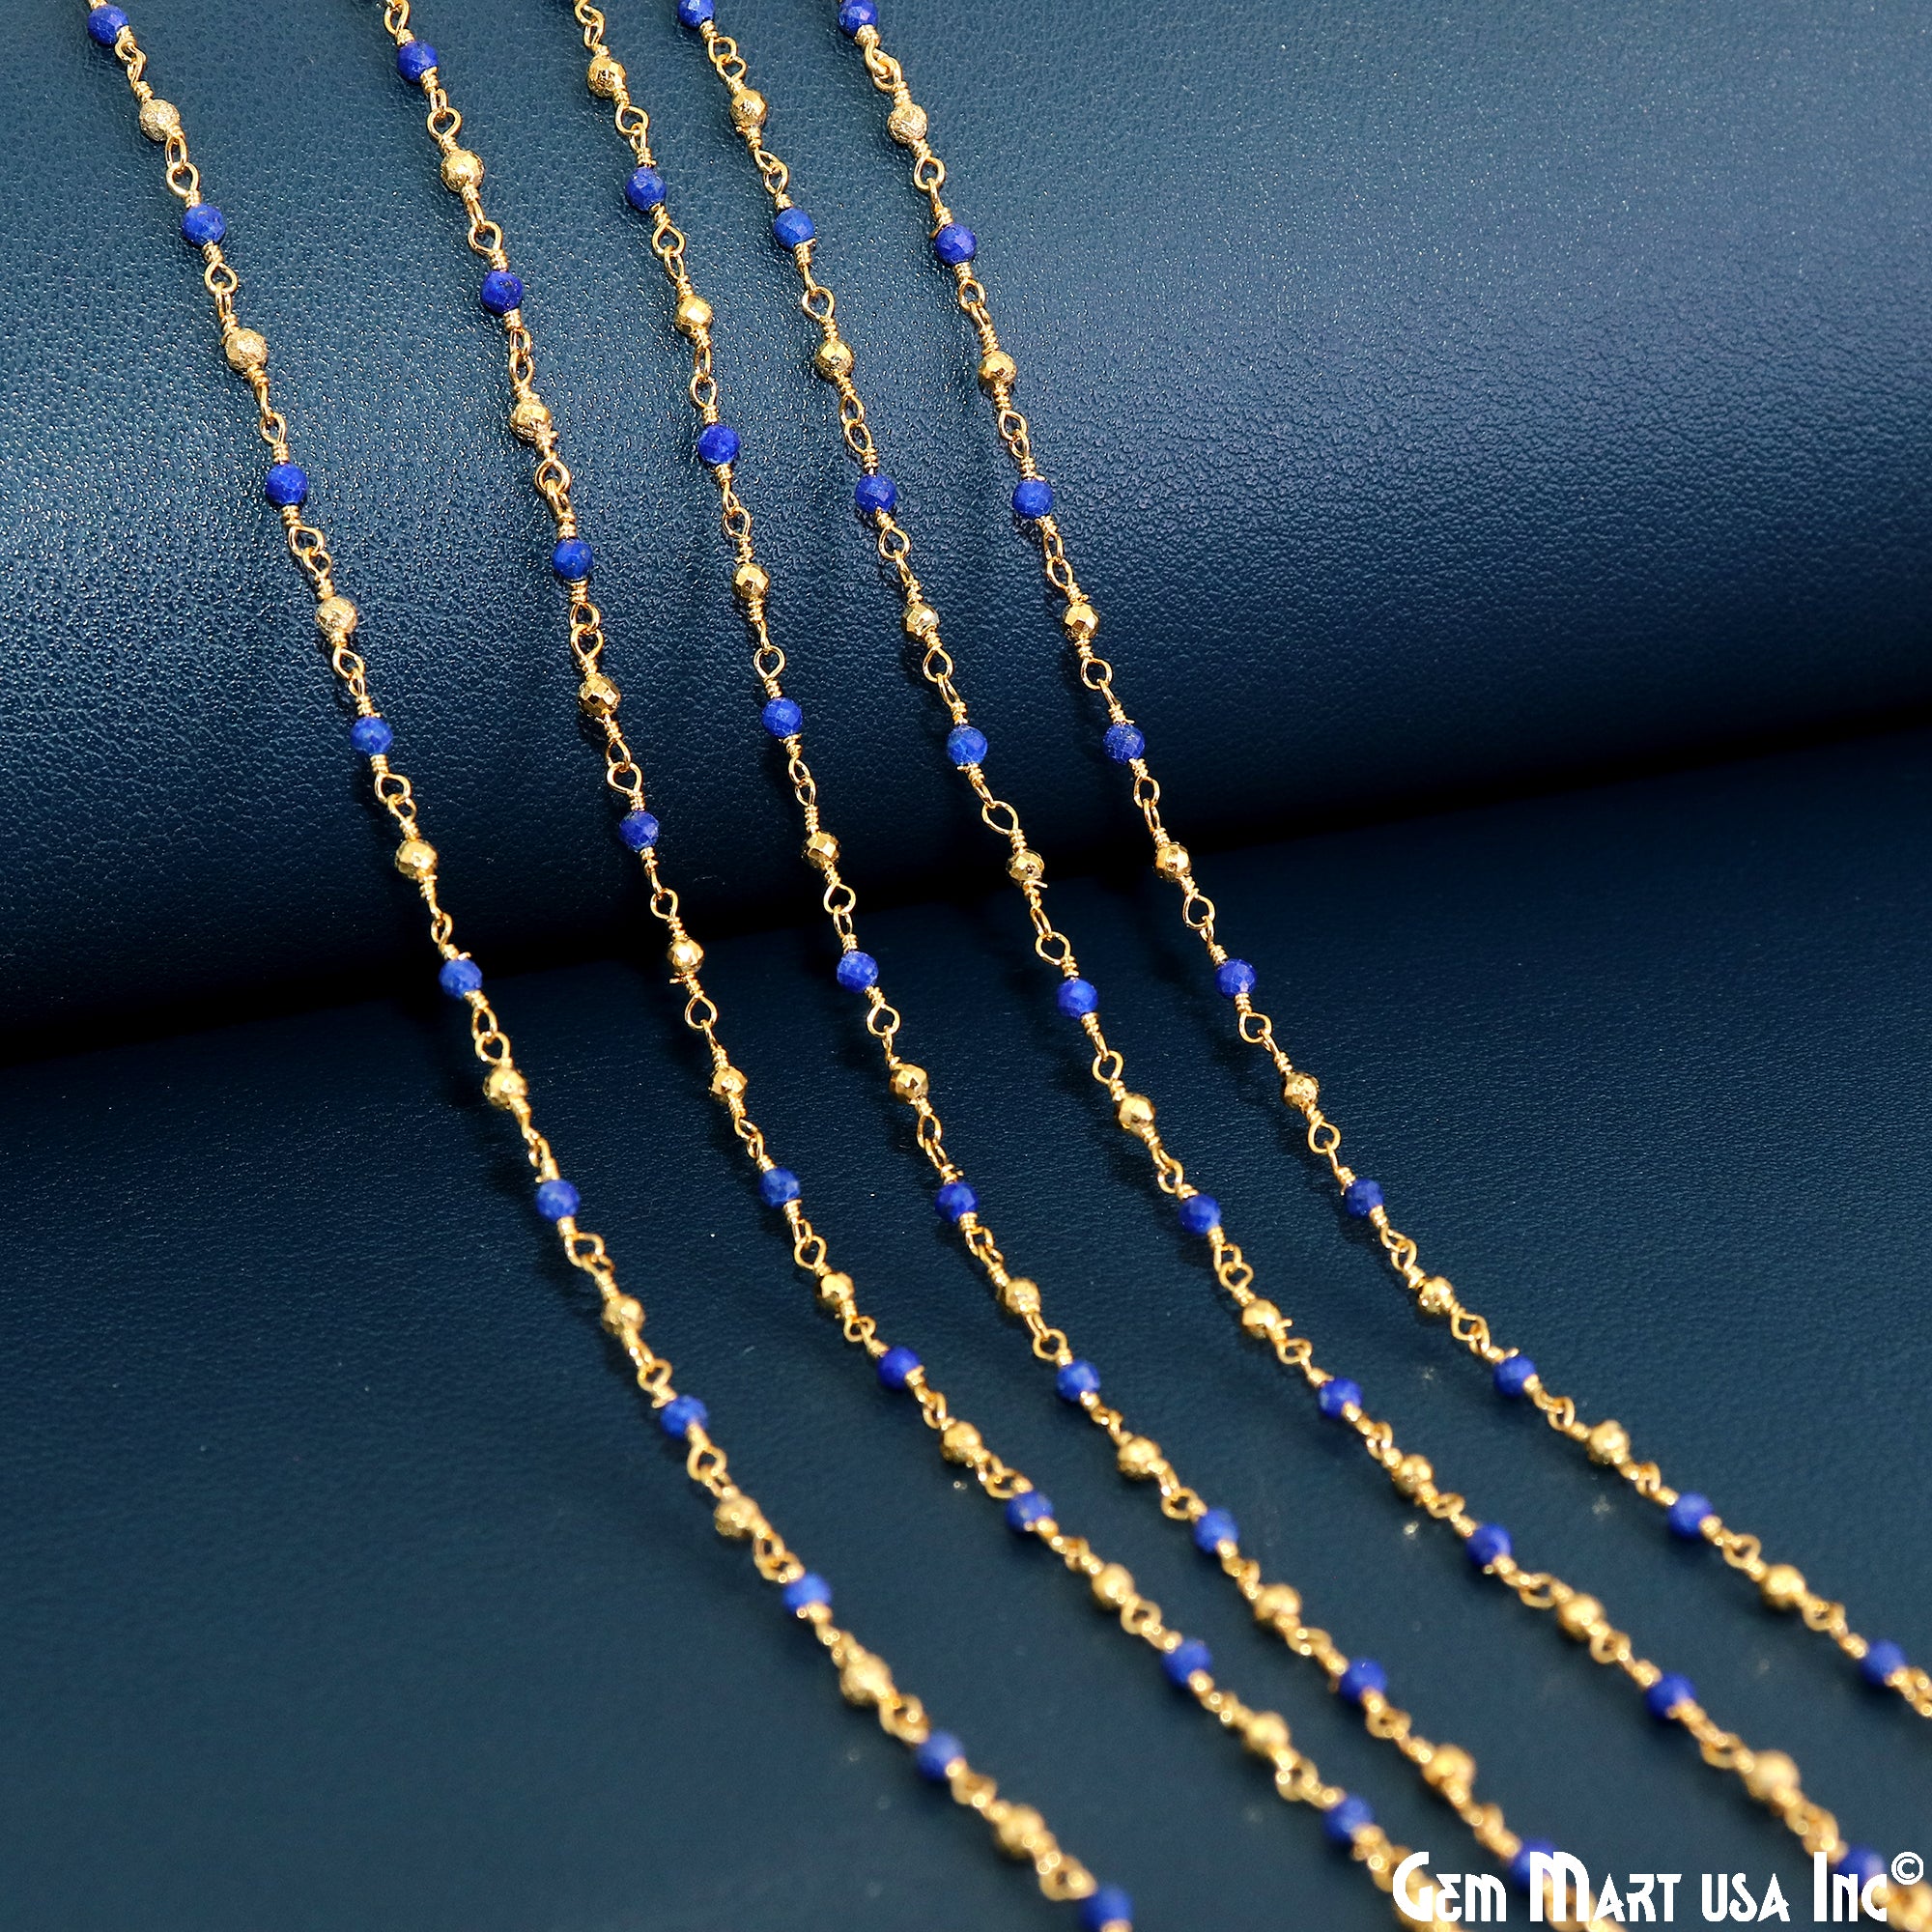 Lapis & Golden Pyrite 2-2.5mm Tiny Beads Gold Plated Wire Wrapped Rosary Chain